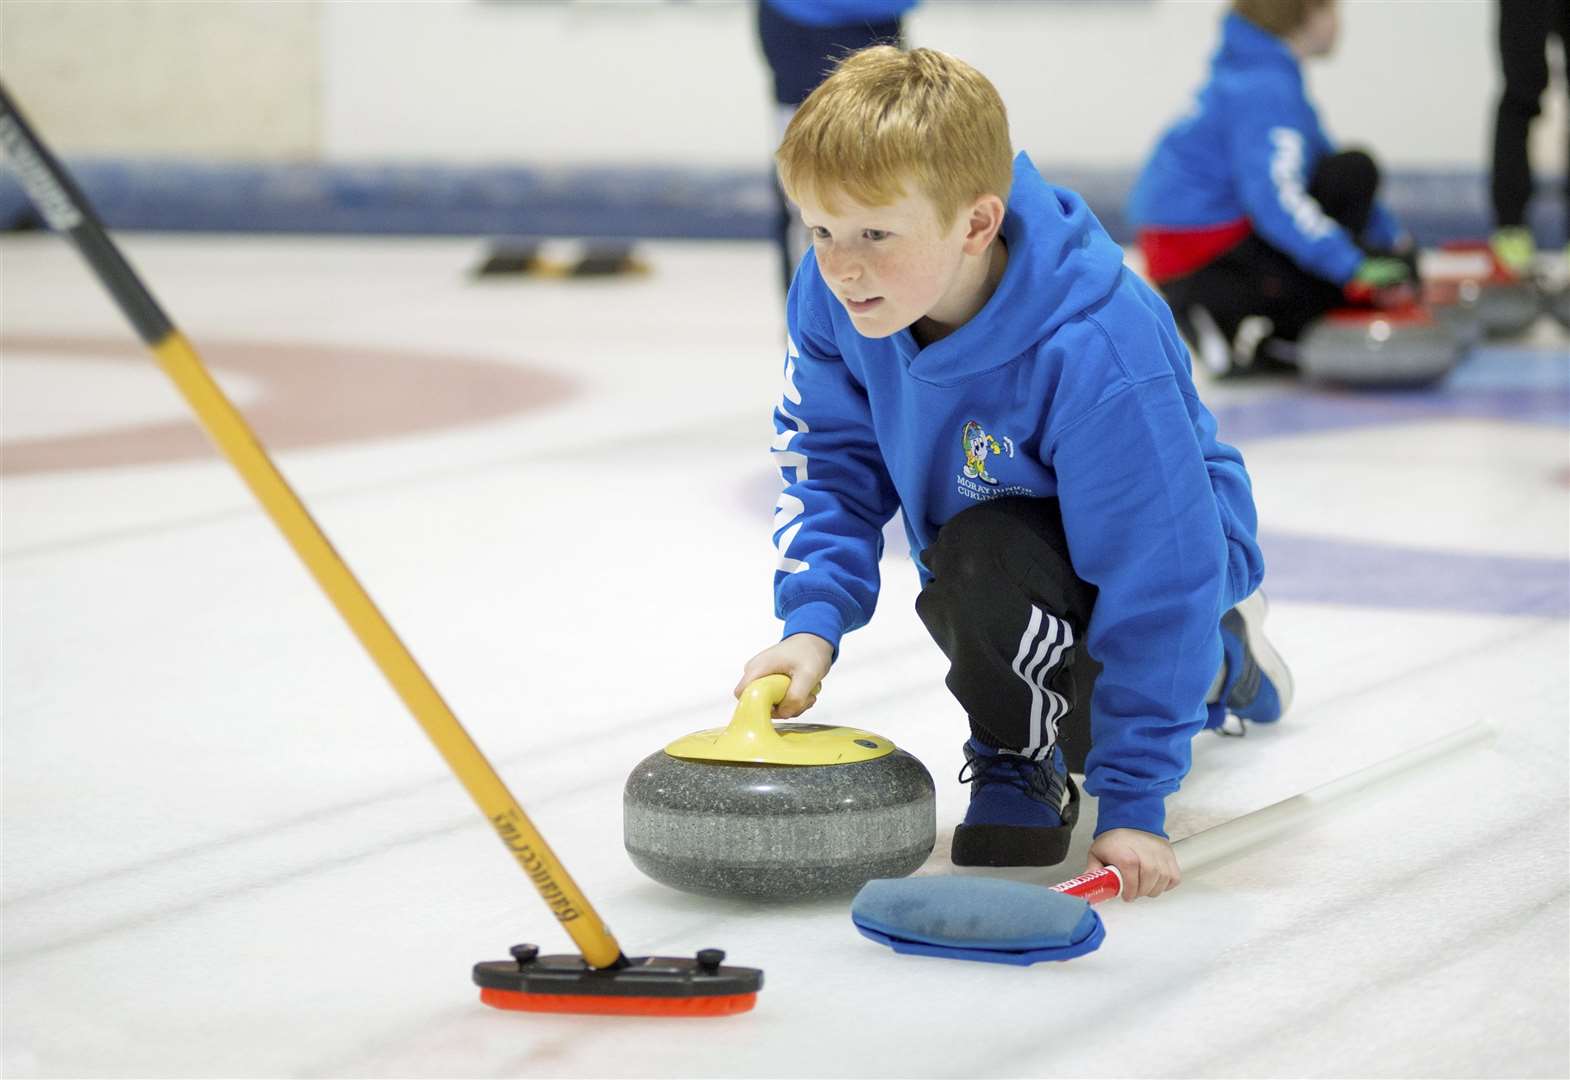 Junior curlers take part in the senior league at Moray Leisure Centre.